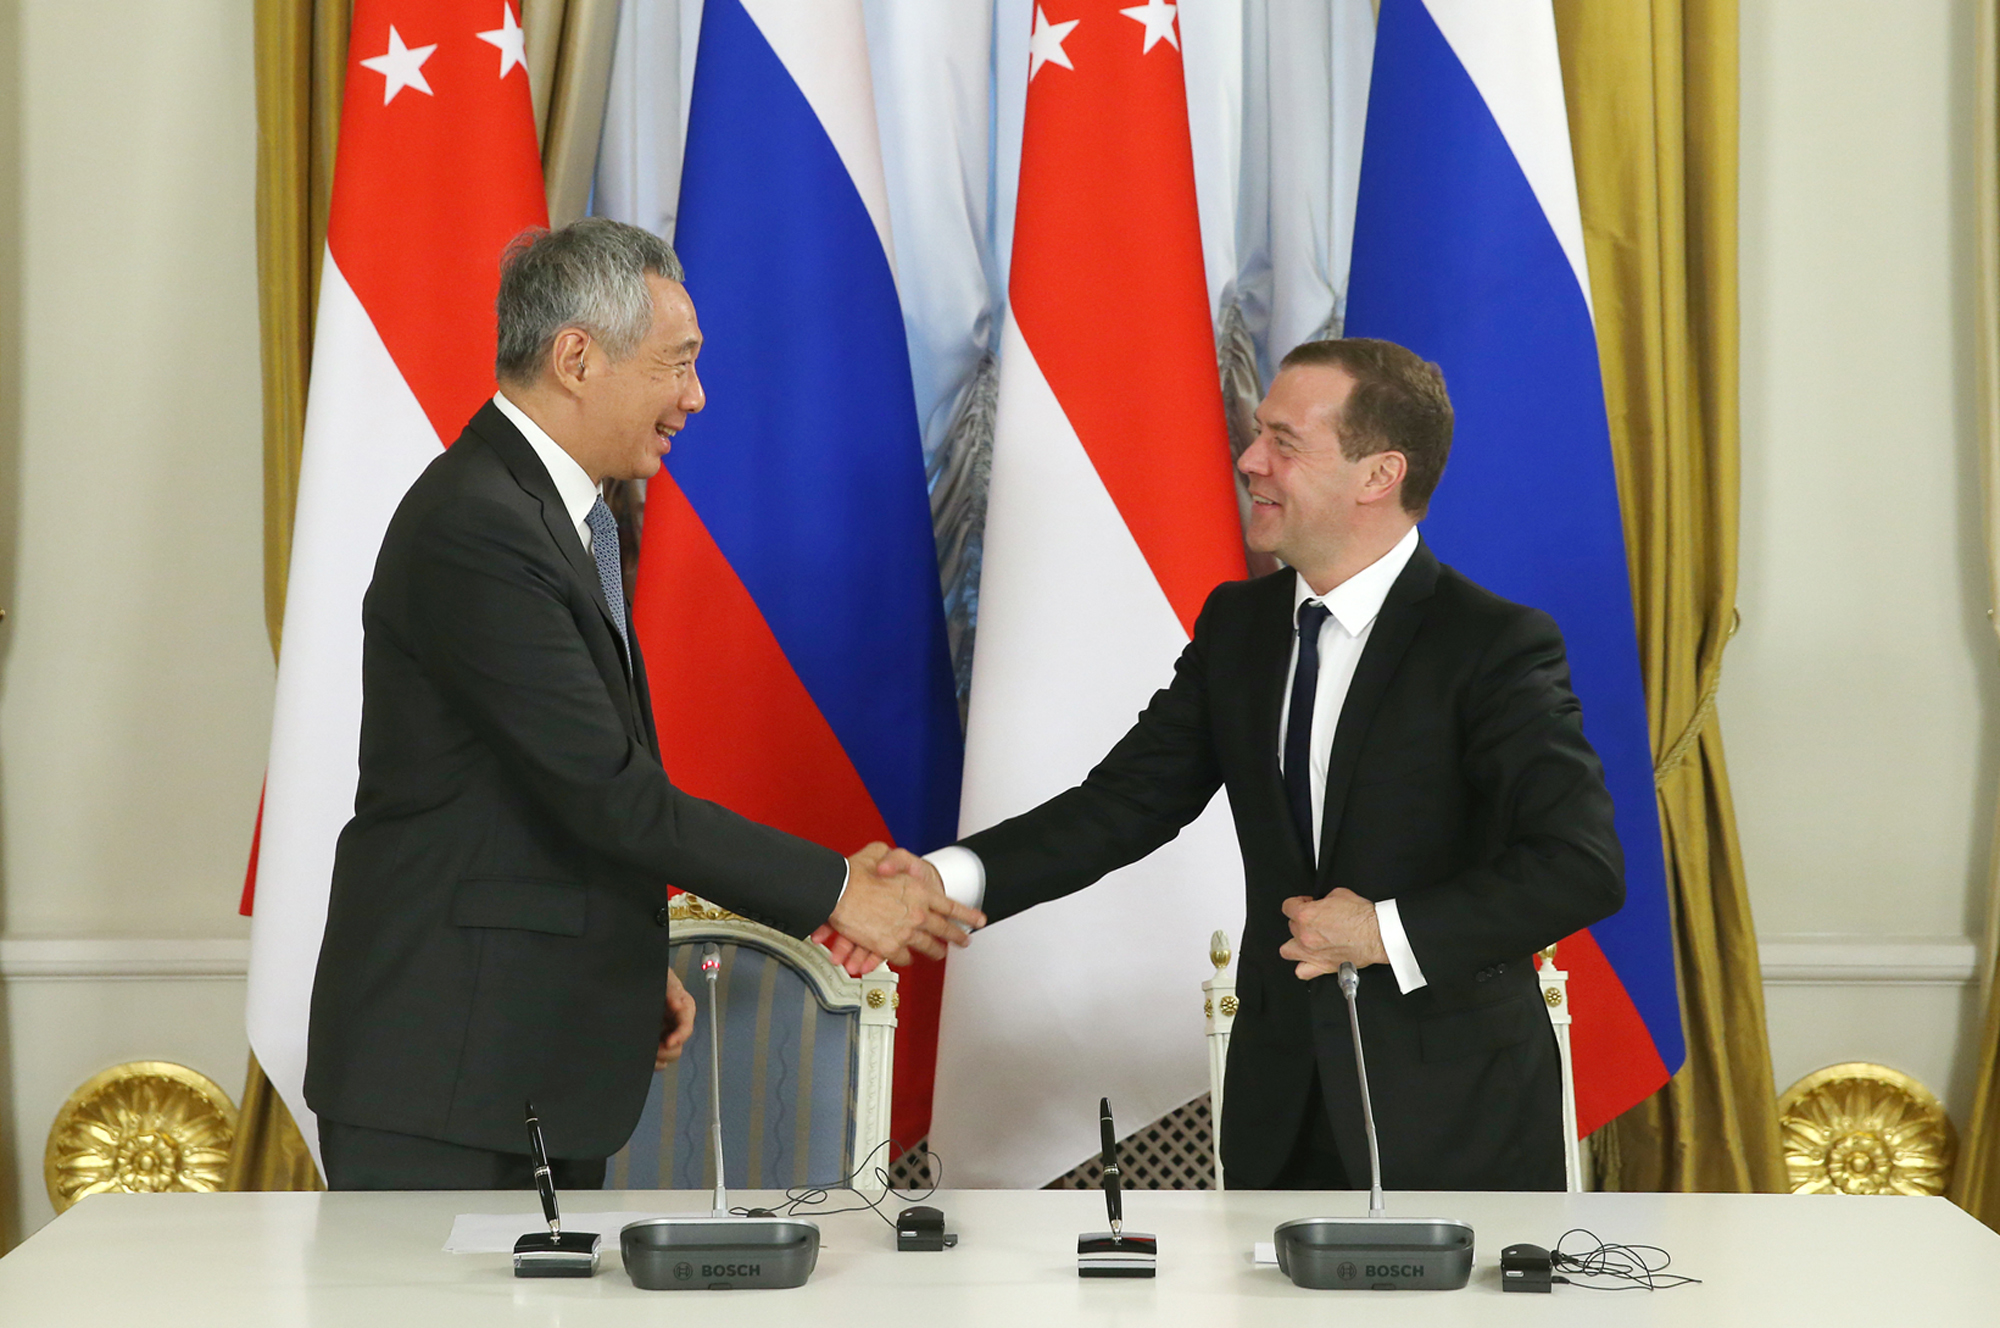 PM Lee Hsien Loong  at press conference with Russian PM Dmitry Medvedev on 19 May 2016 (ST Photo. Copyright Singapore Press Holdings Limited. Reproduced with permission)